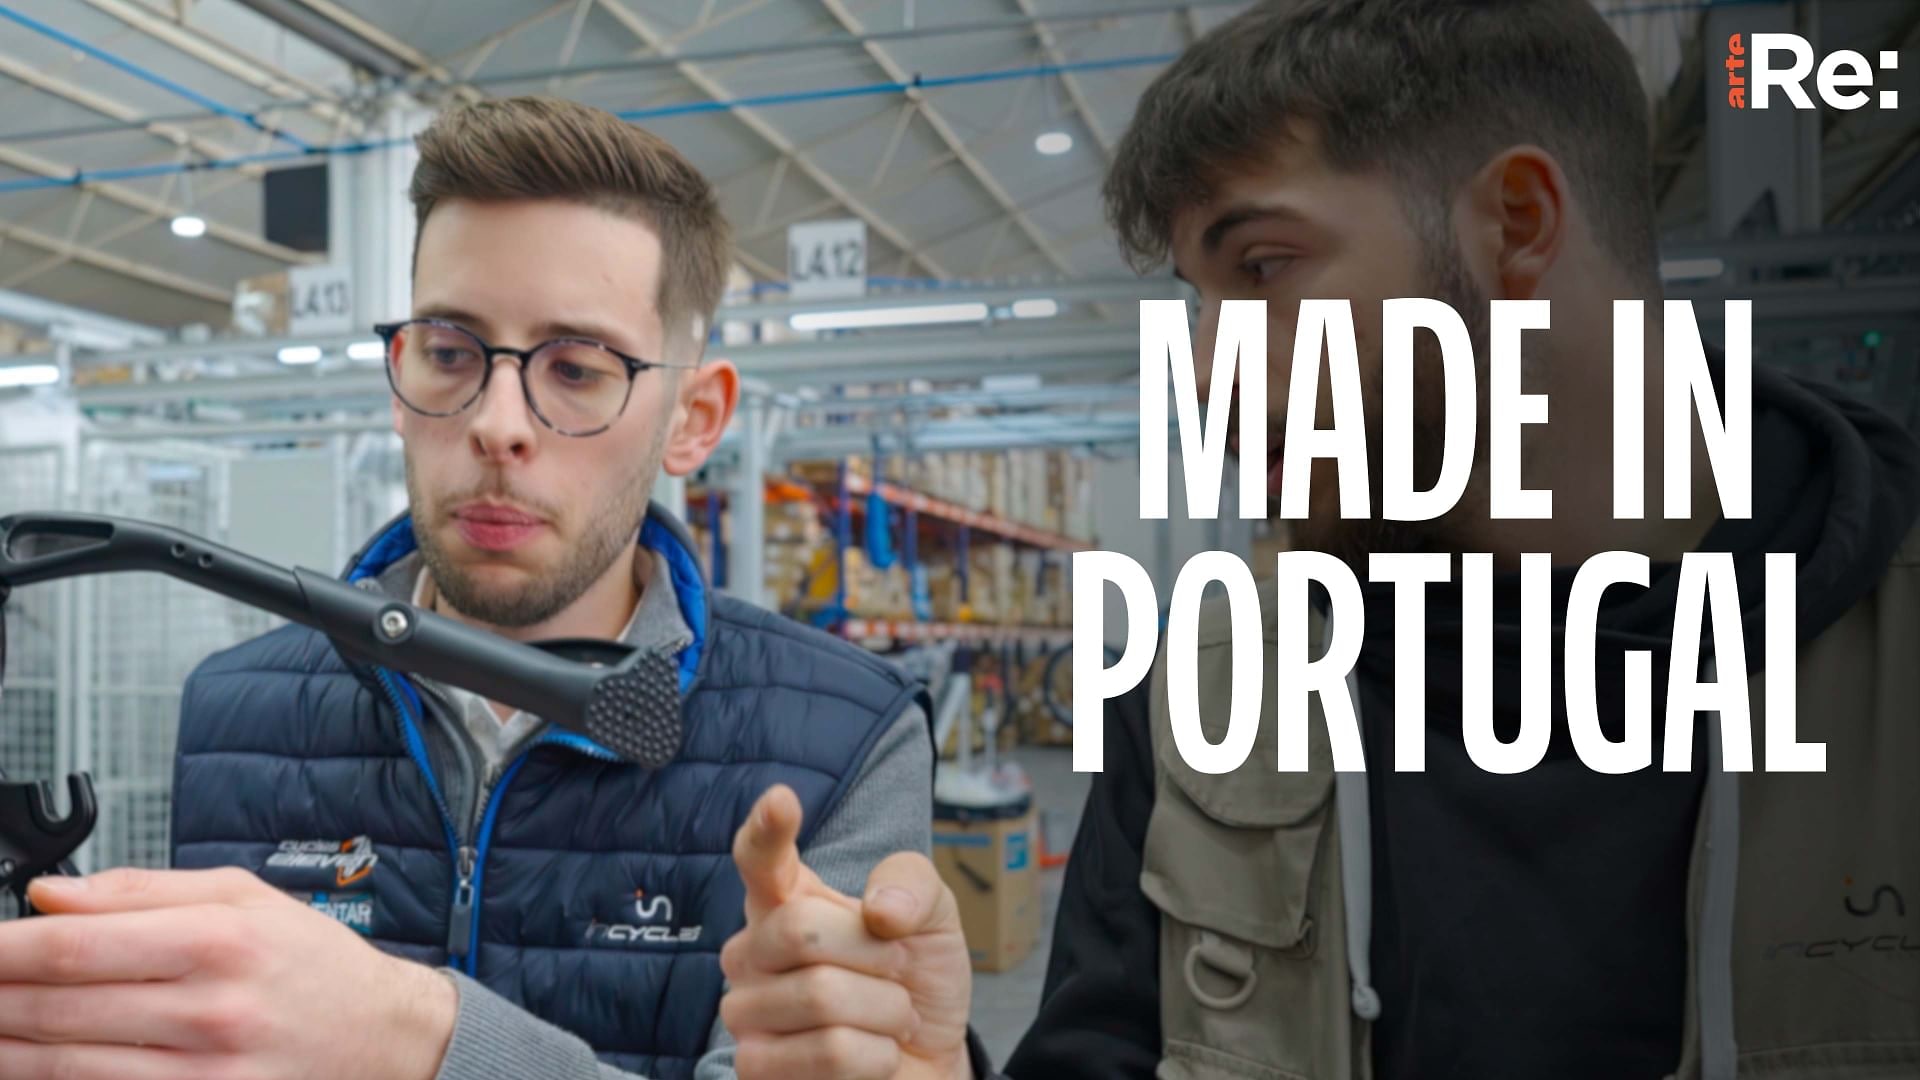 Re: Made in Portugal